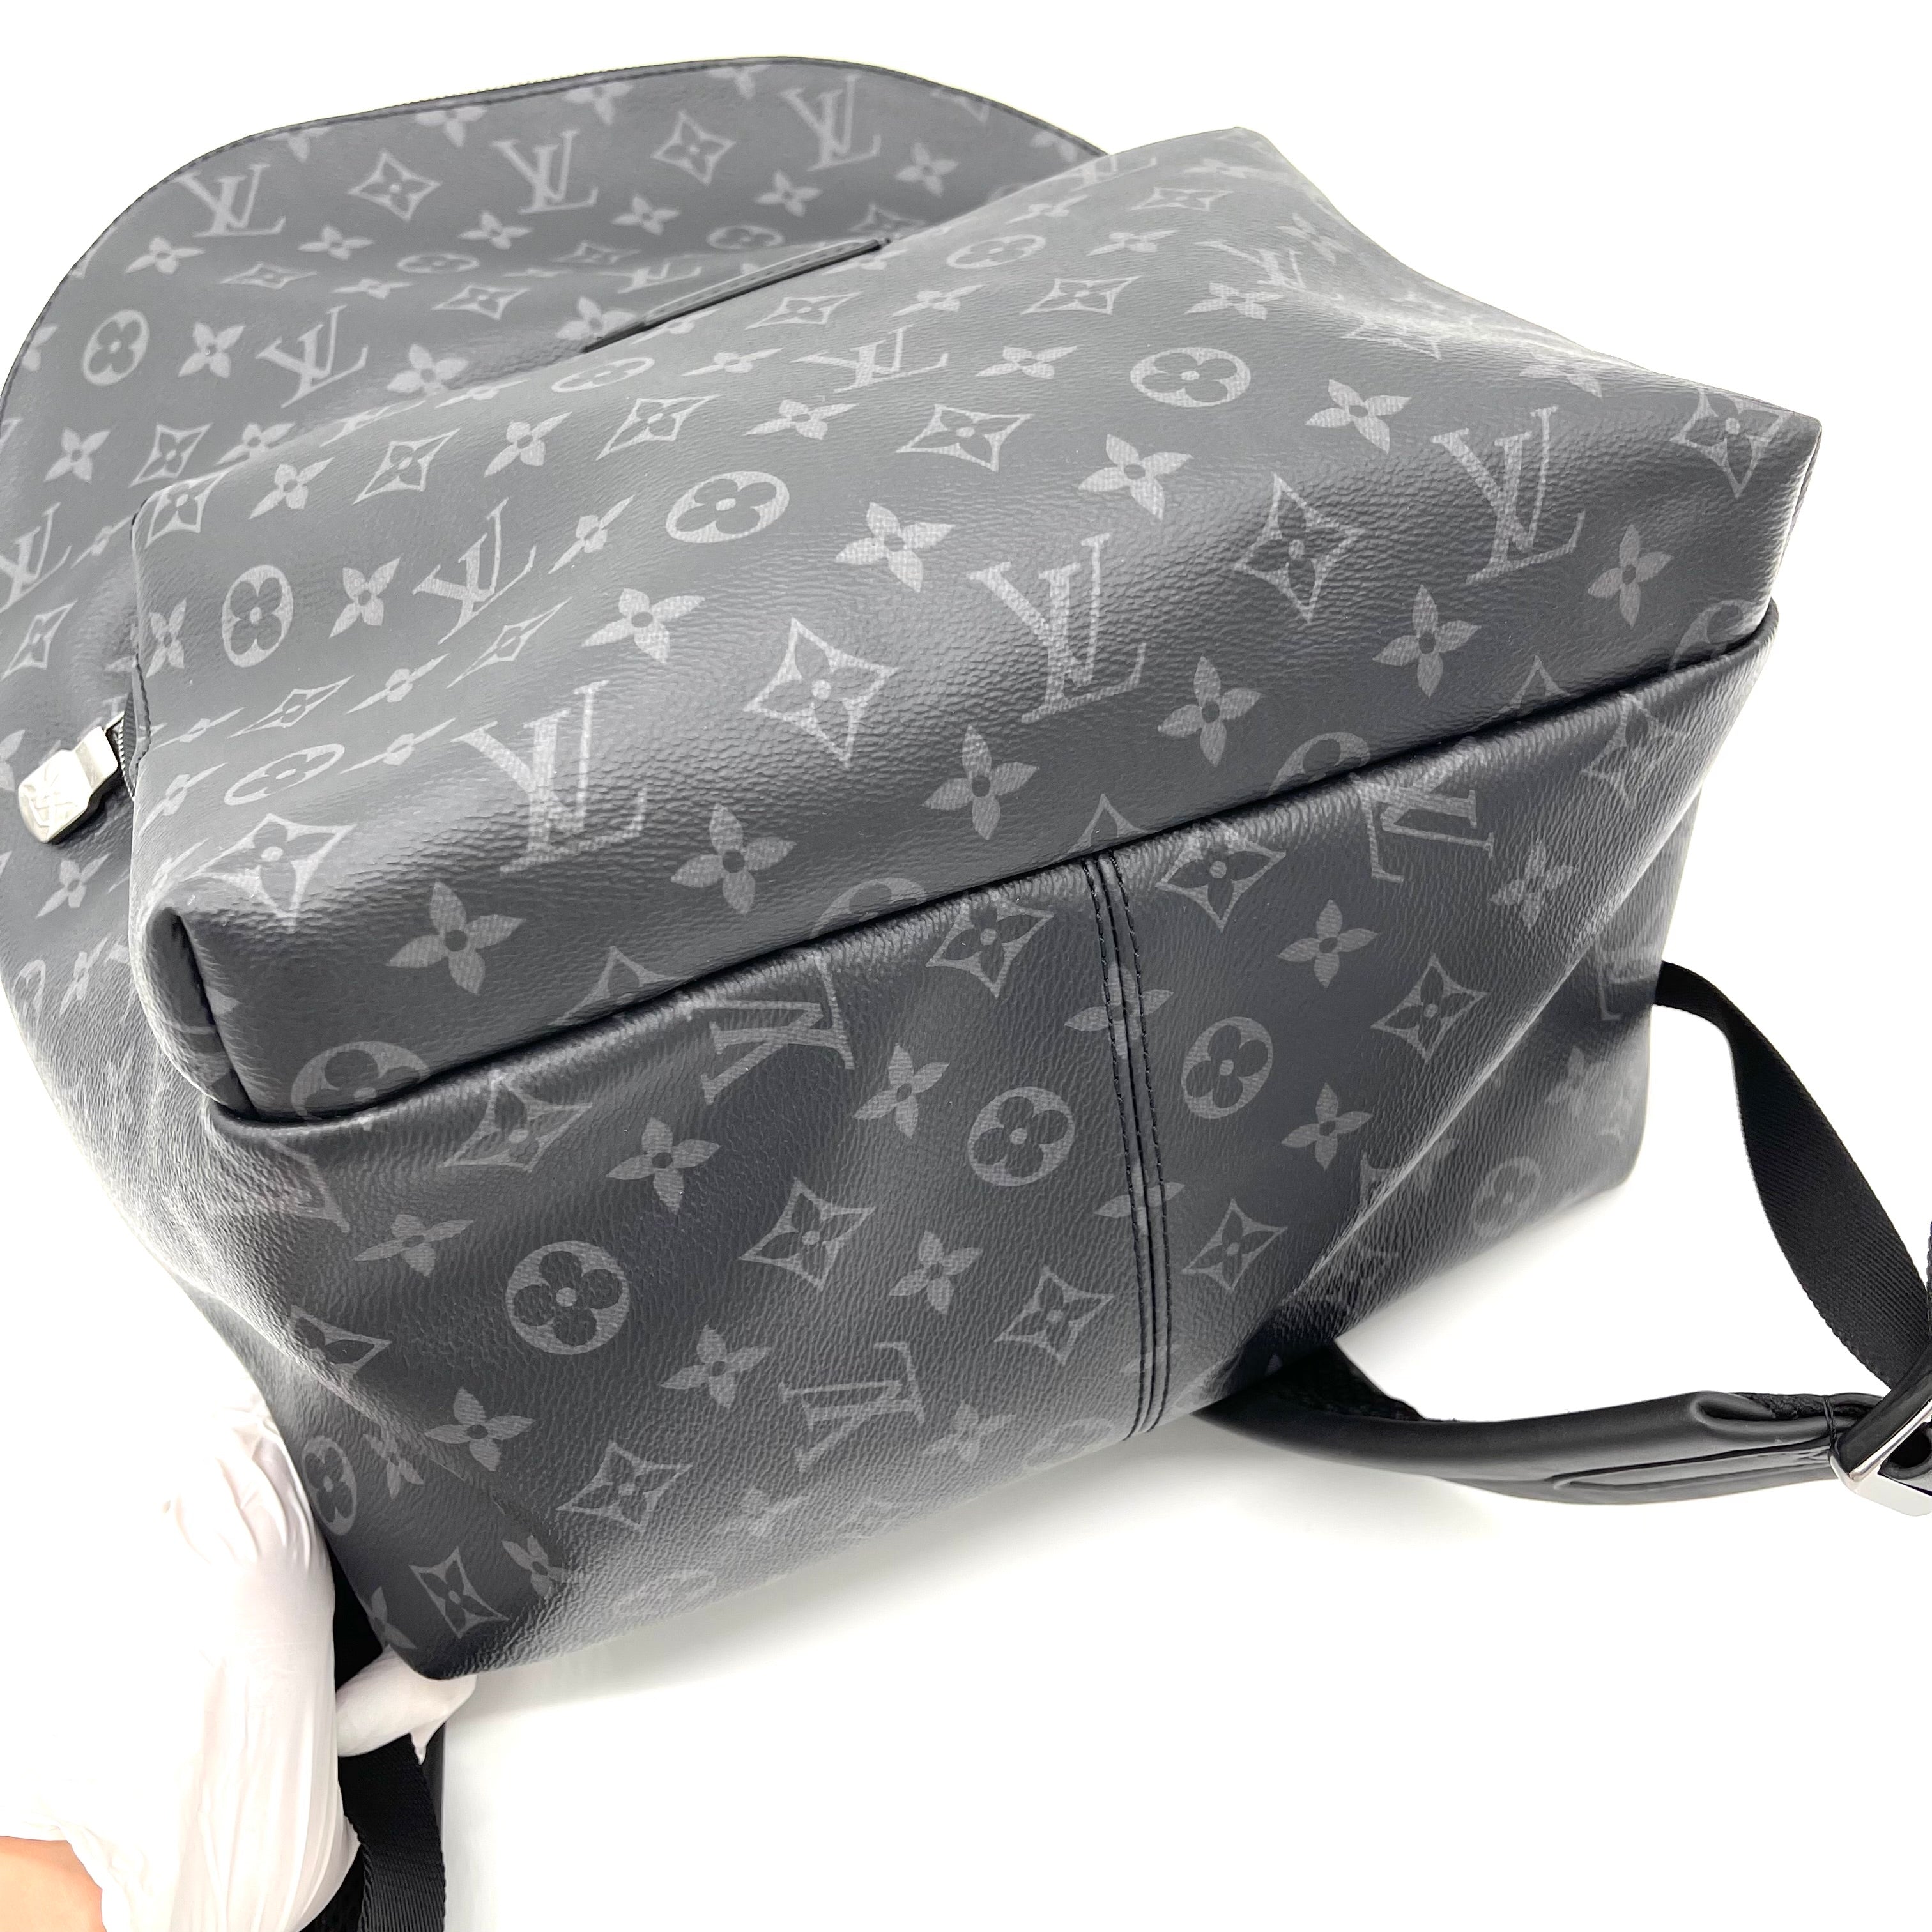 lv backpack discovery